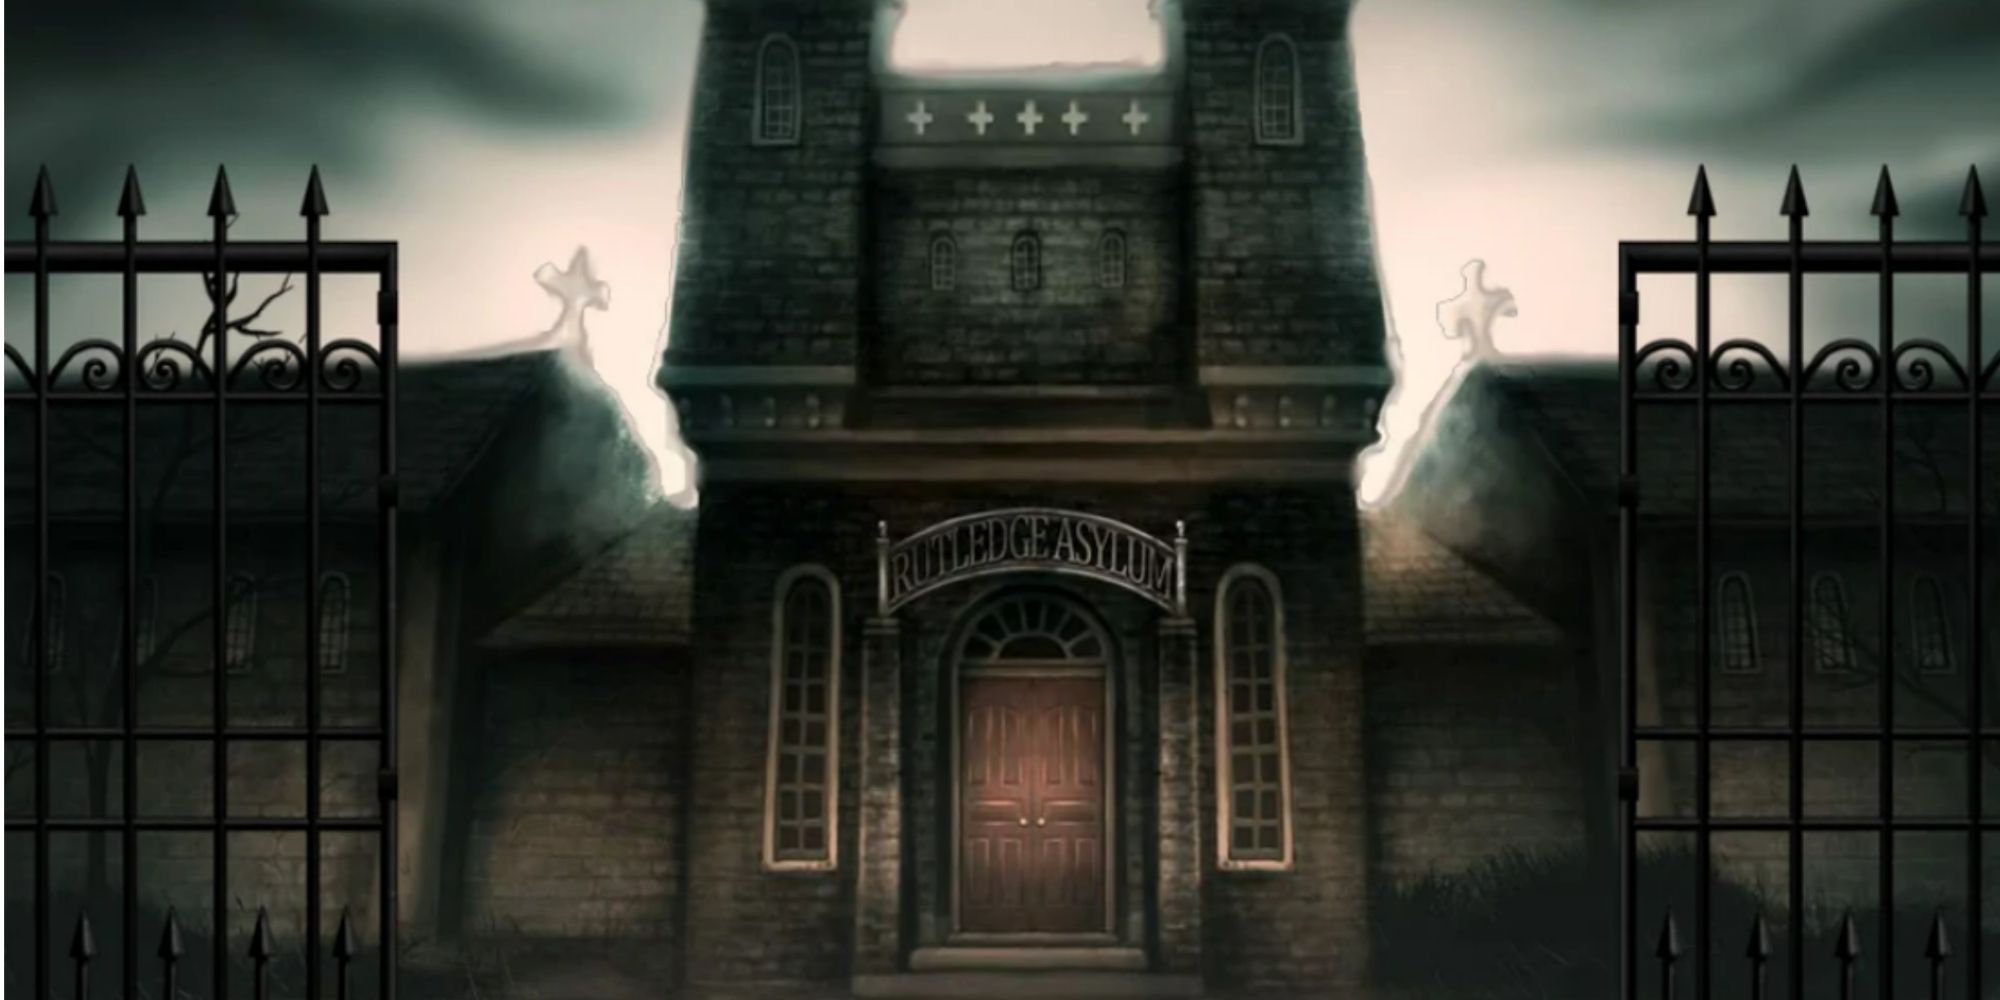 rutledge asylum gates and entrance in alice madness returns